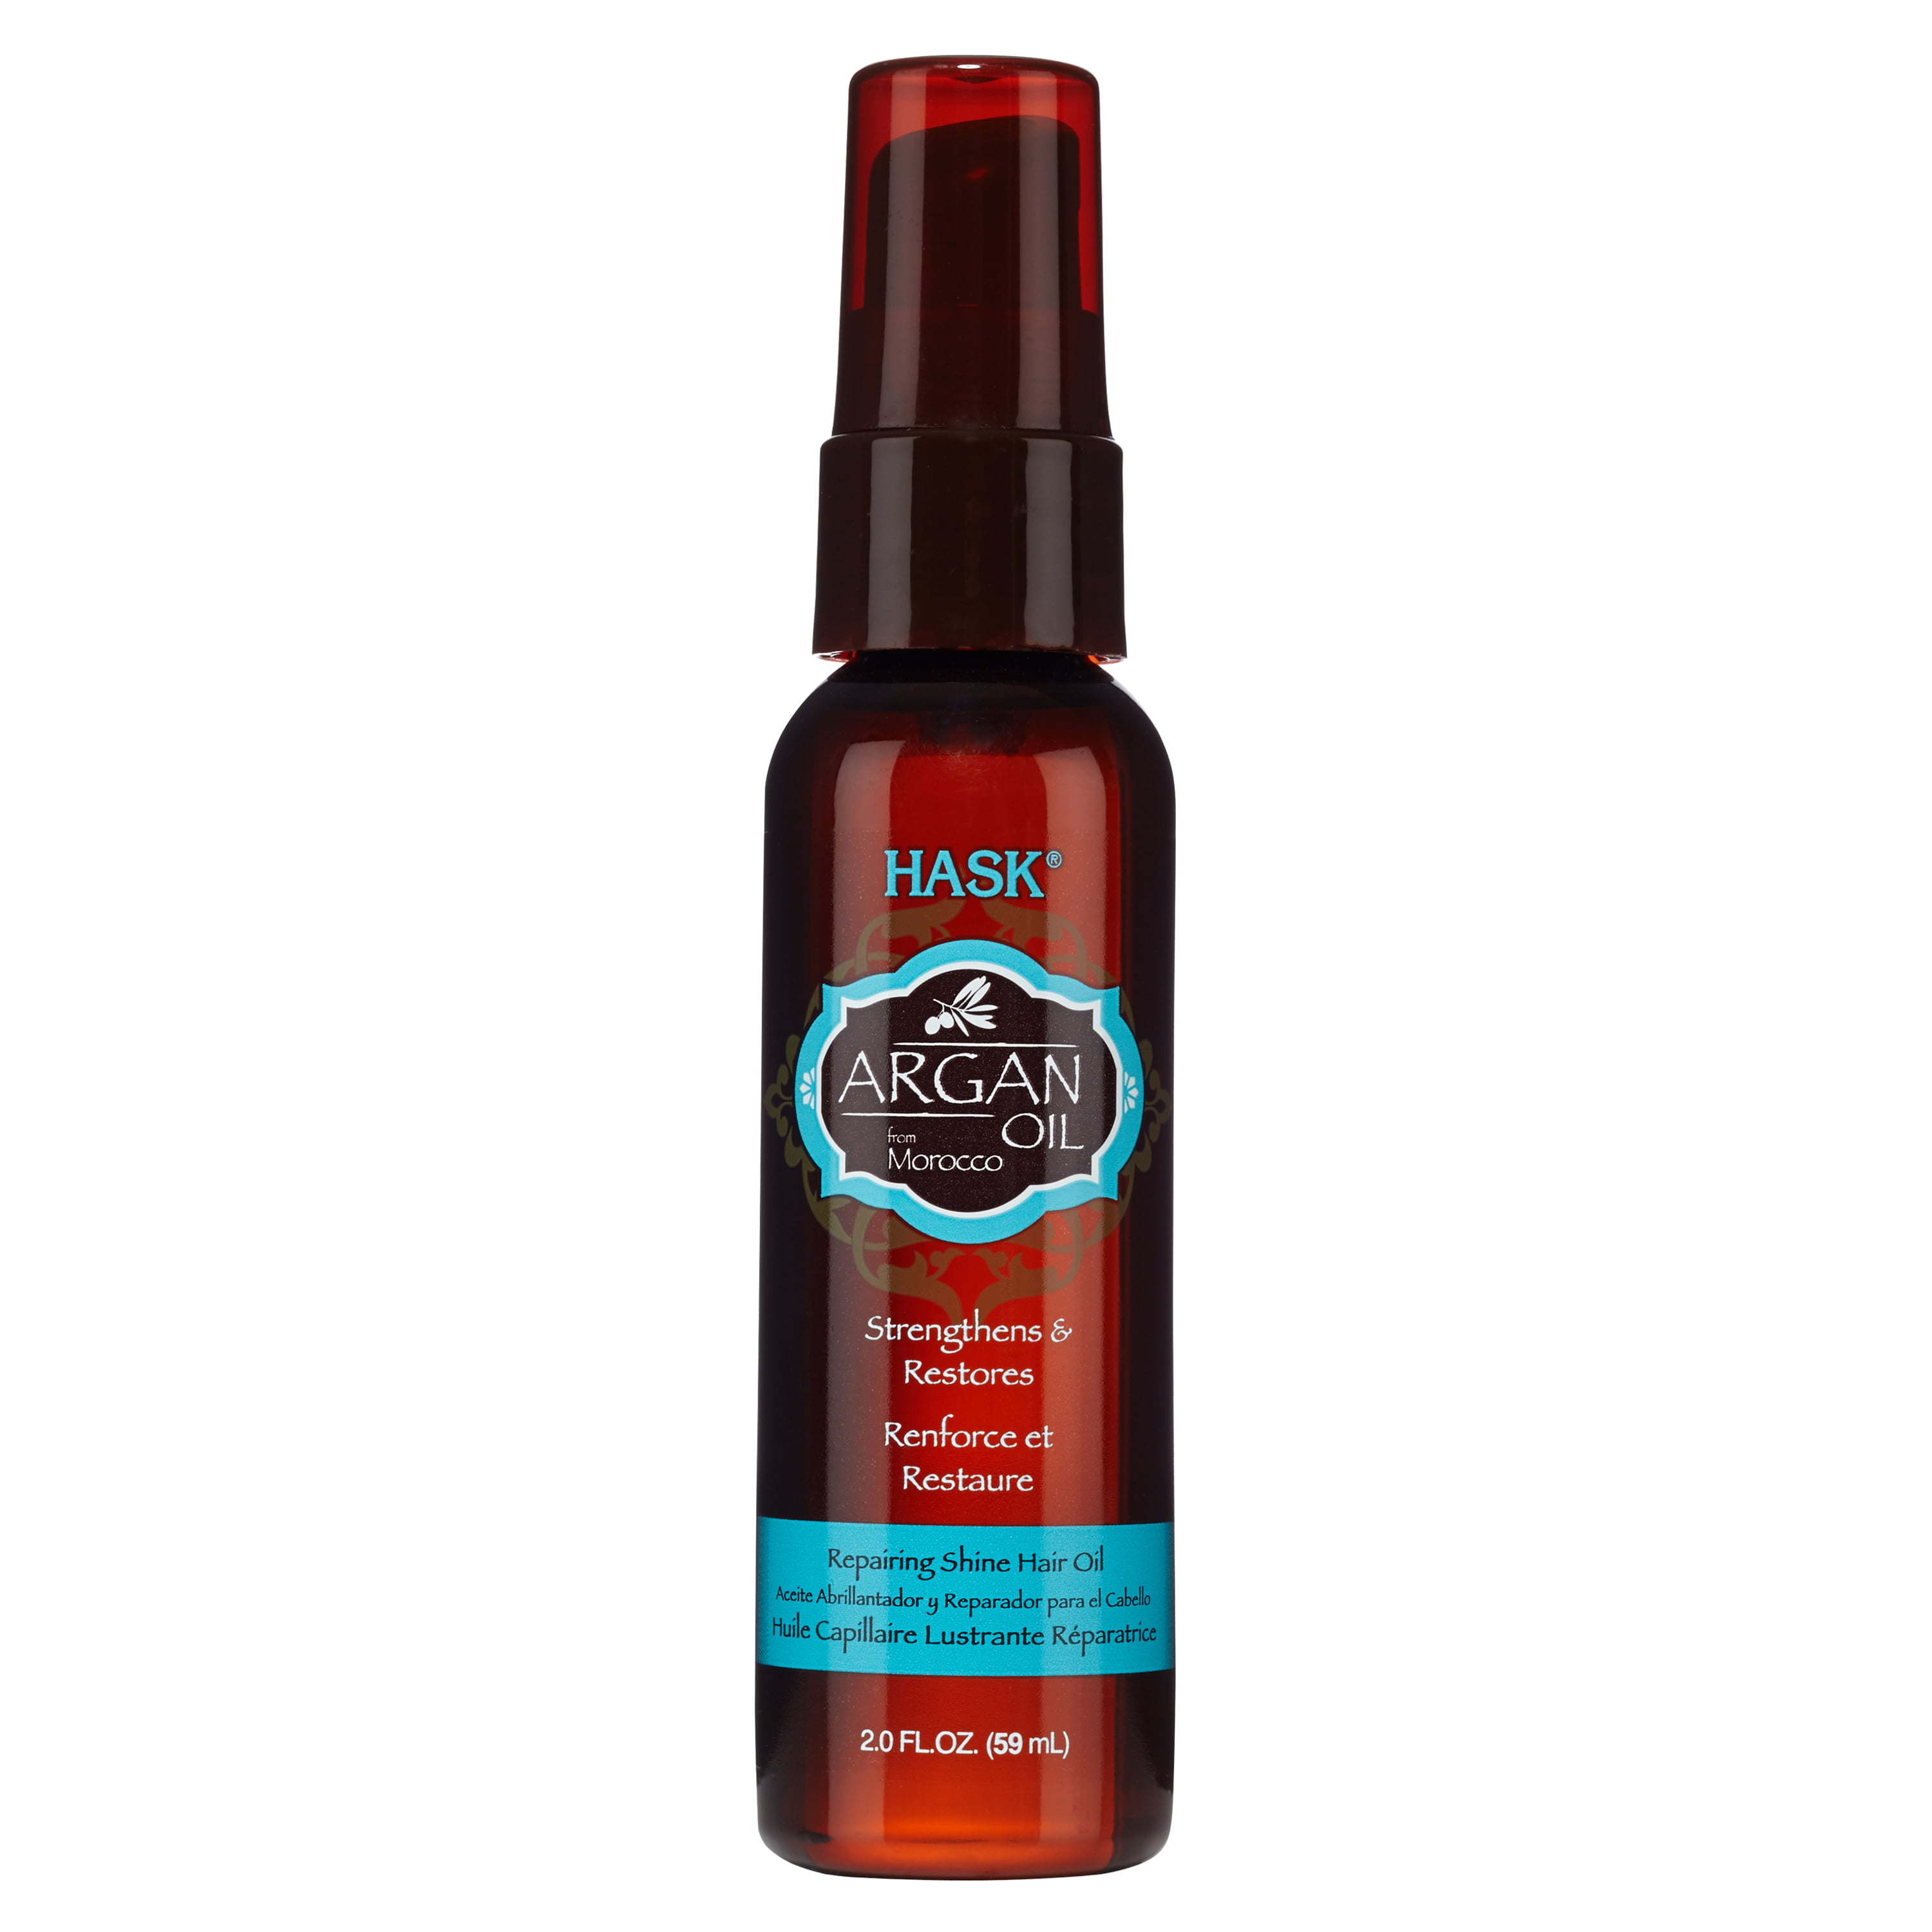 HASK Argan Oil from Morocco Repairing Sulfate-Free ...